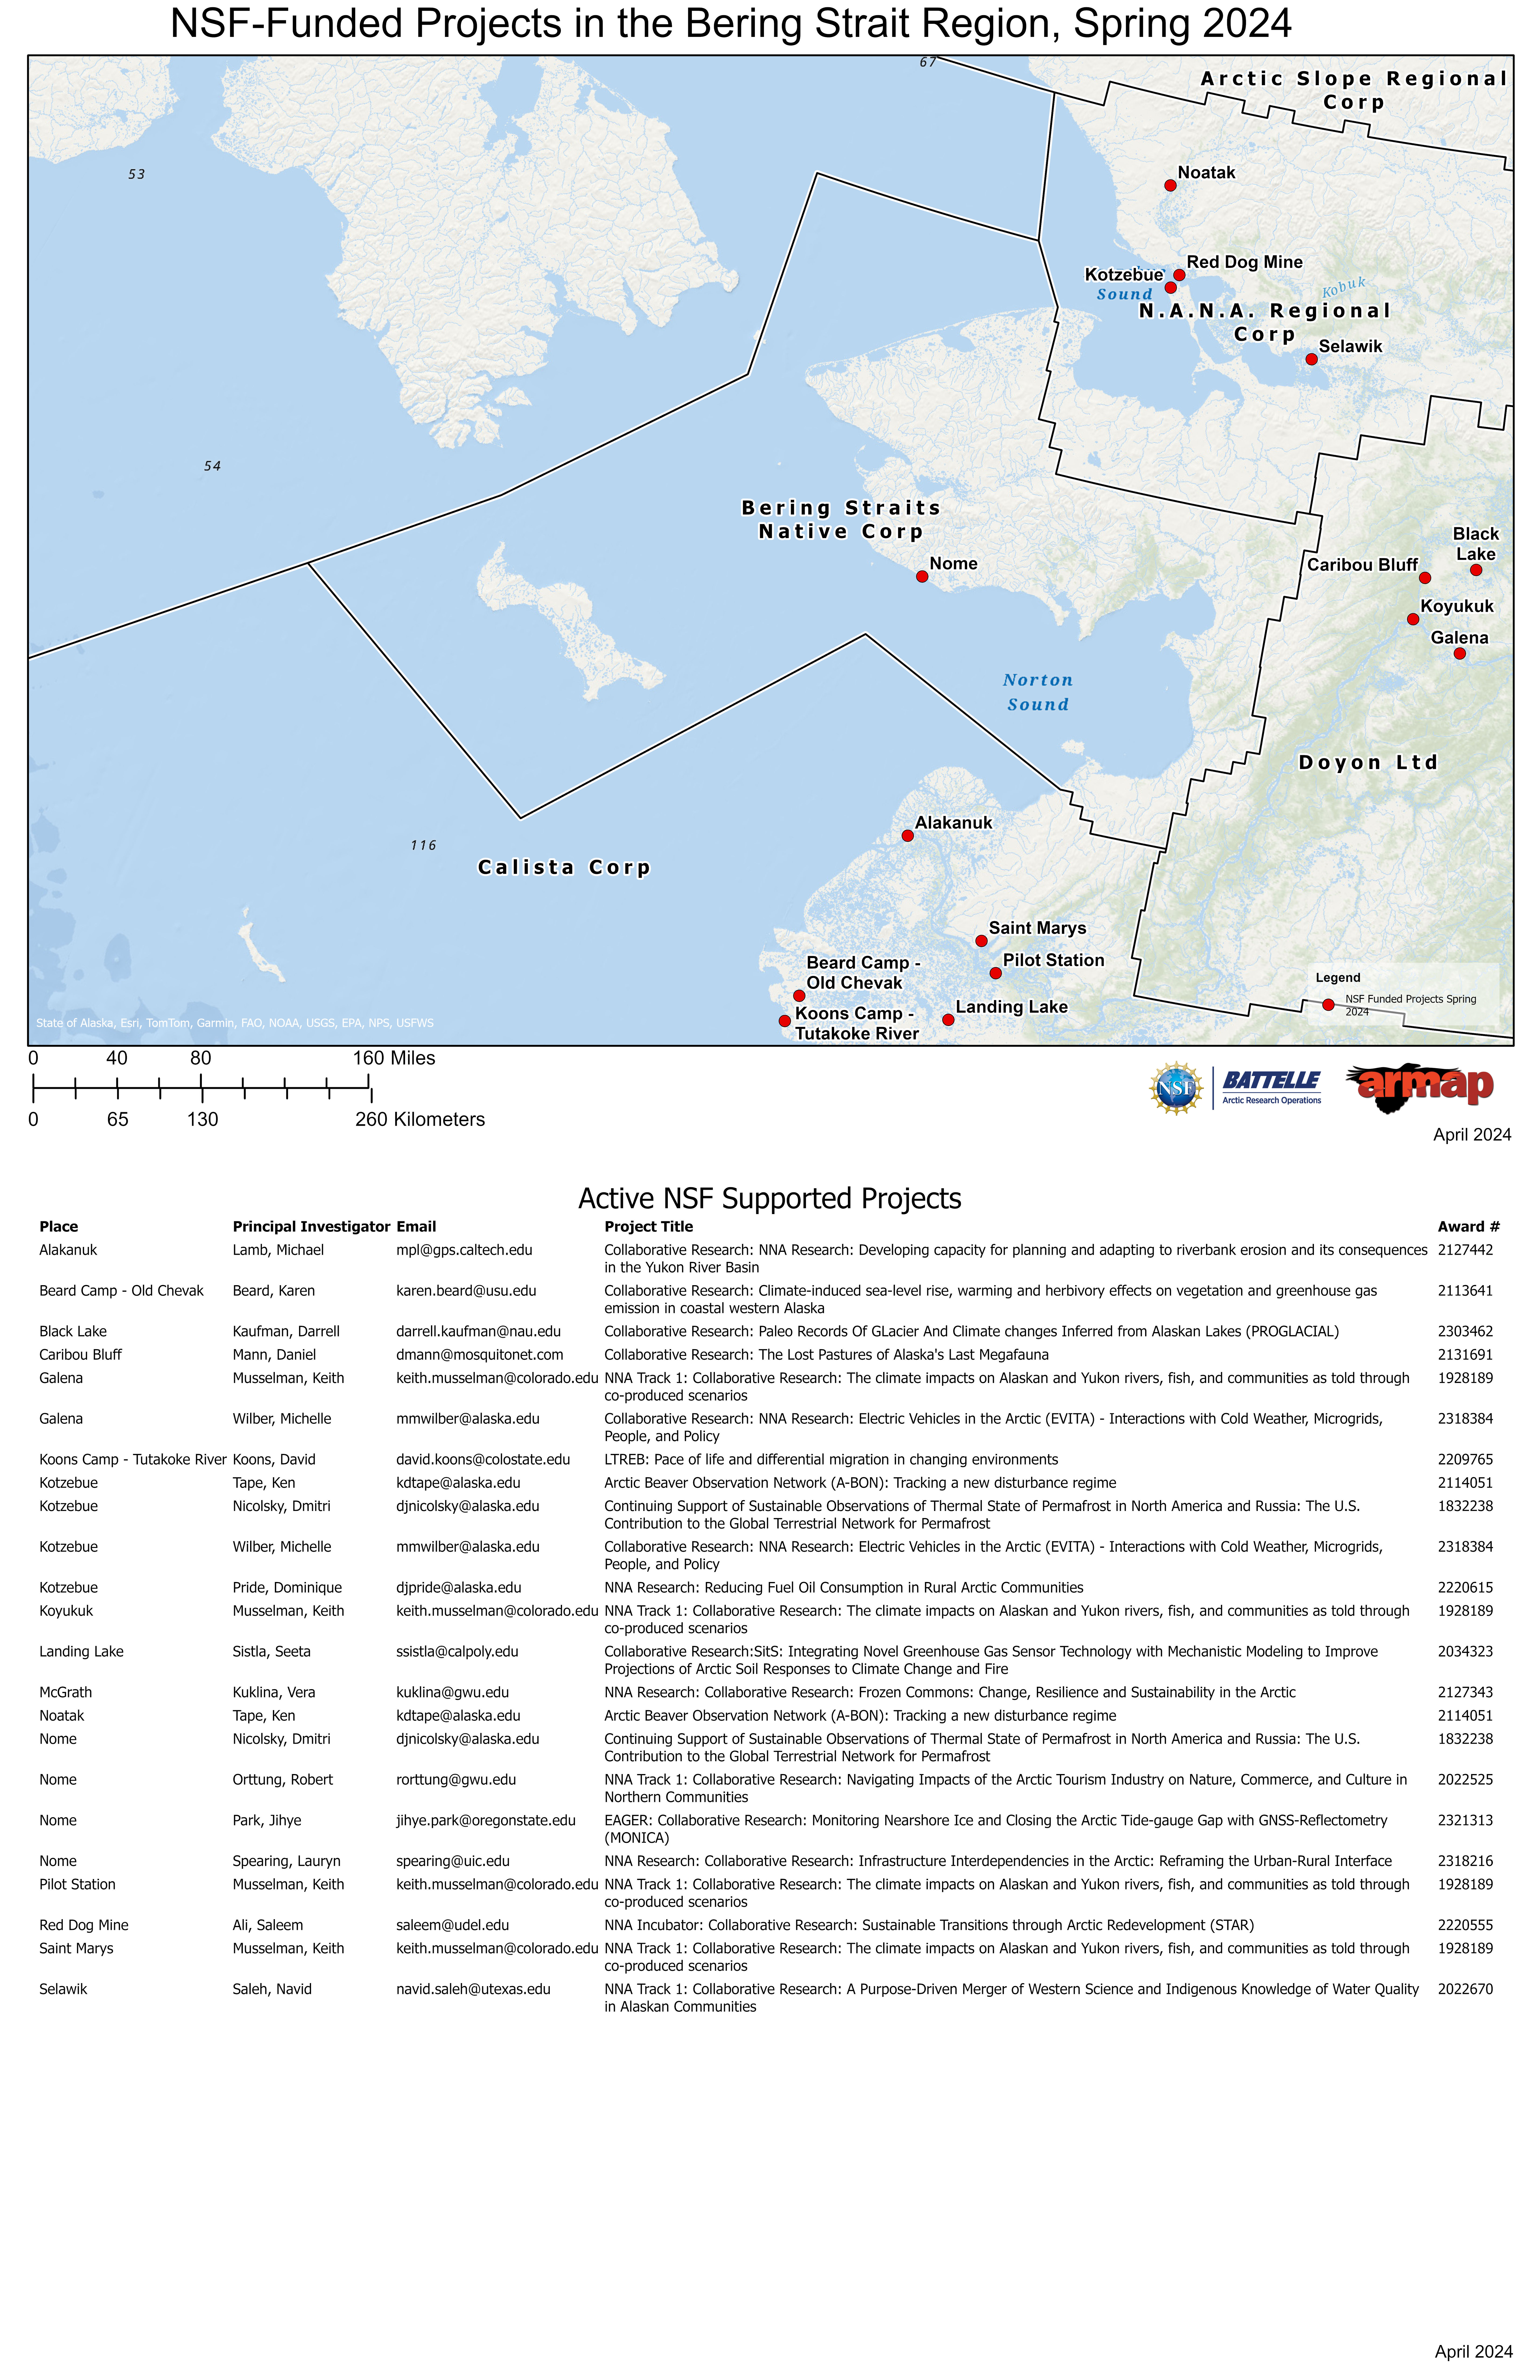 NSF-Funded Projects in the Bering Strait Region, Spring of this Year